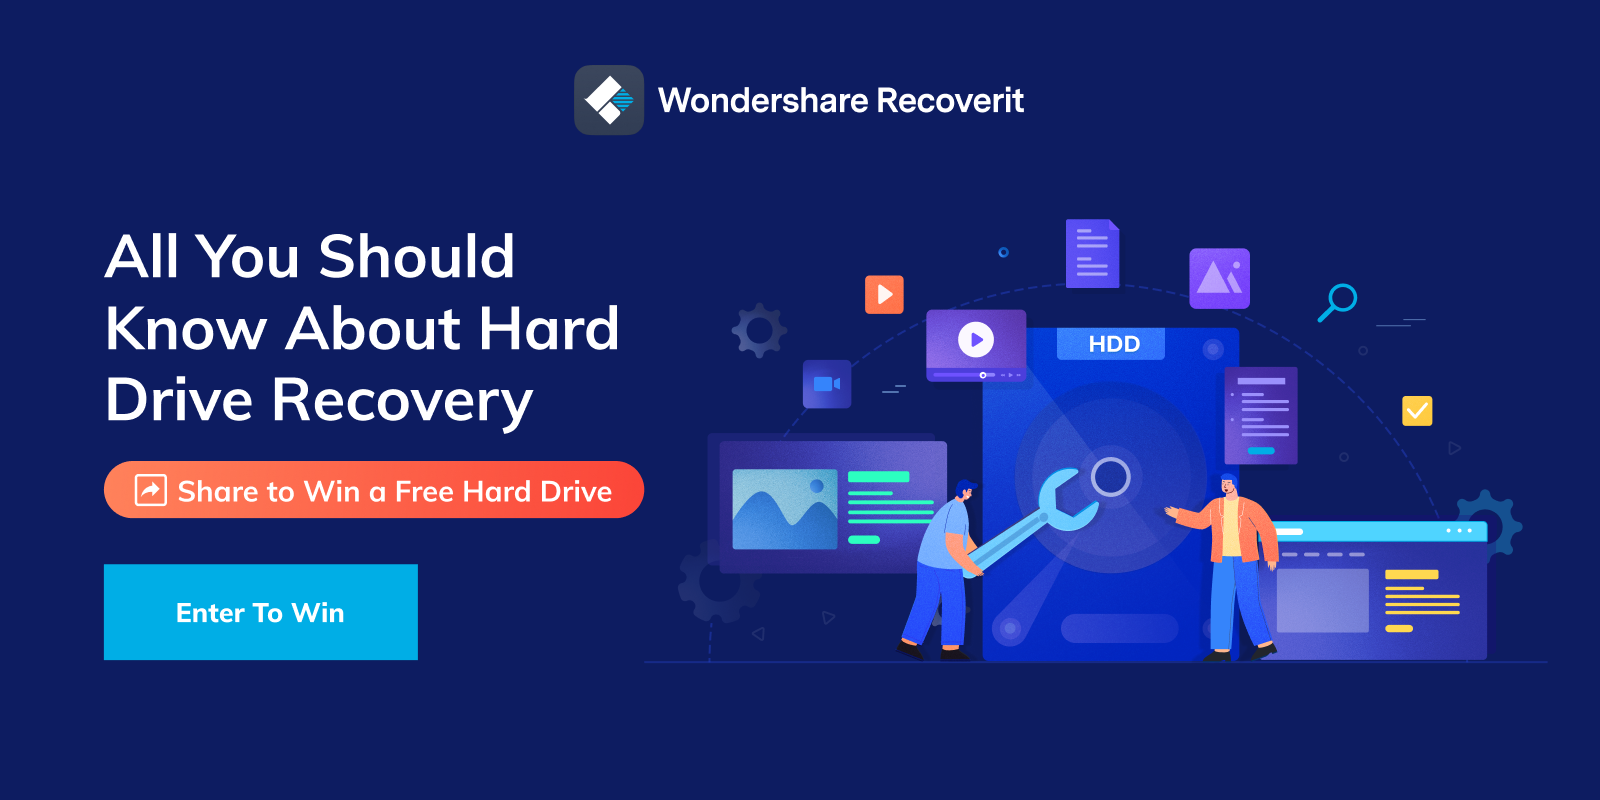 recoverit free account